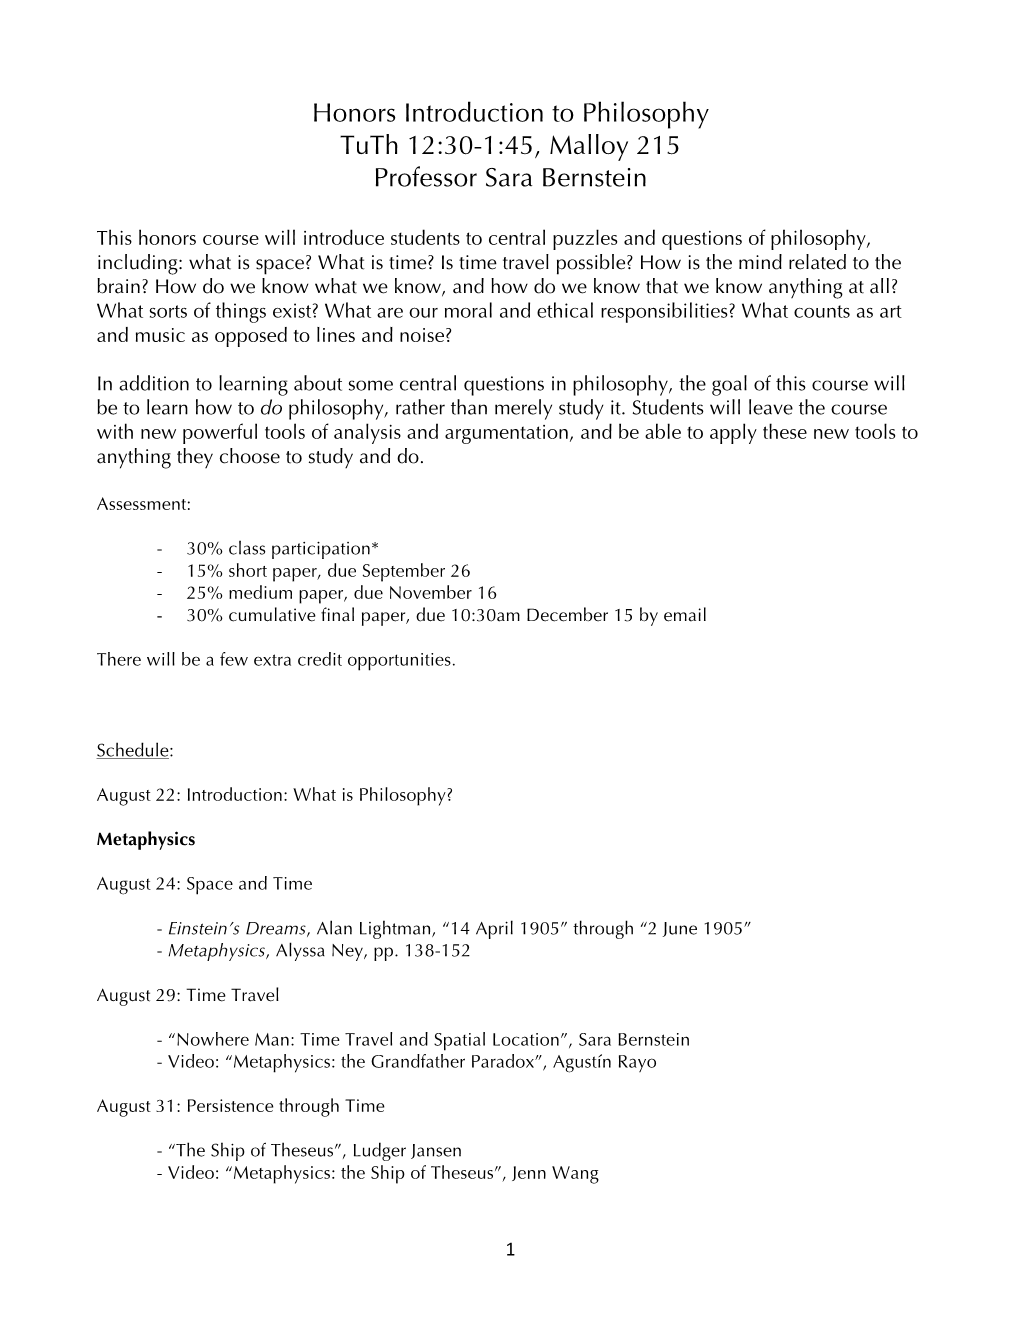 Honors Introduction to Philosophy Tuth 12:30-1:45, Malloy 215 Professor Sara Bernstein